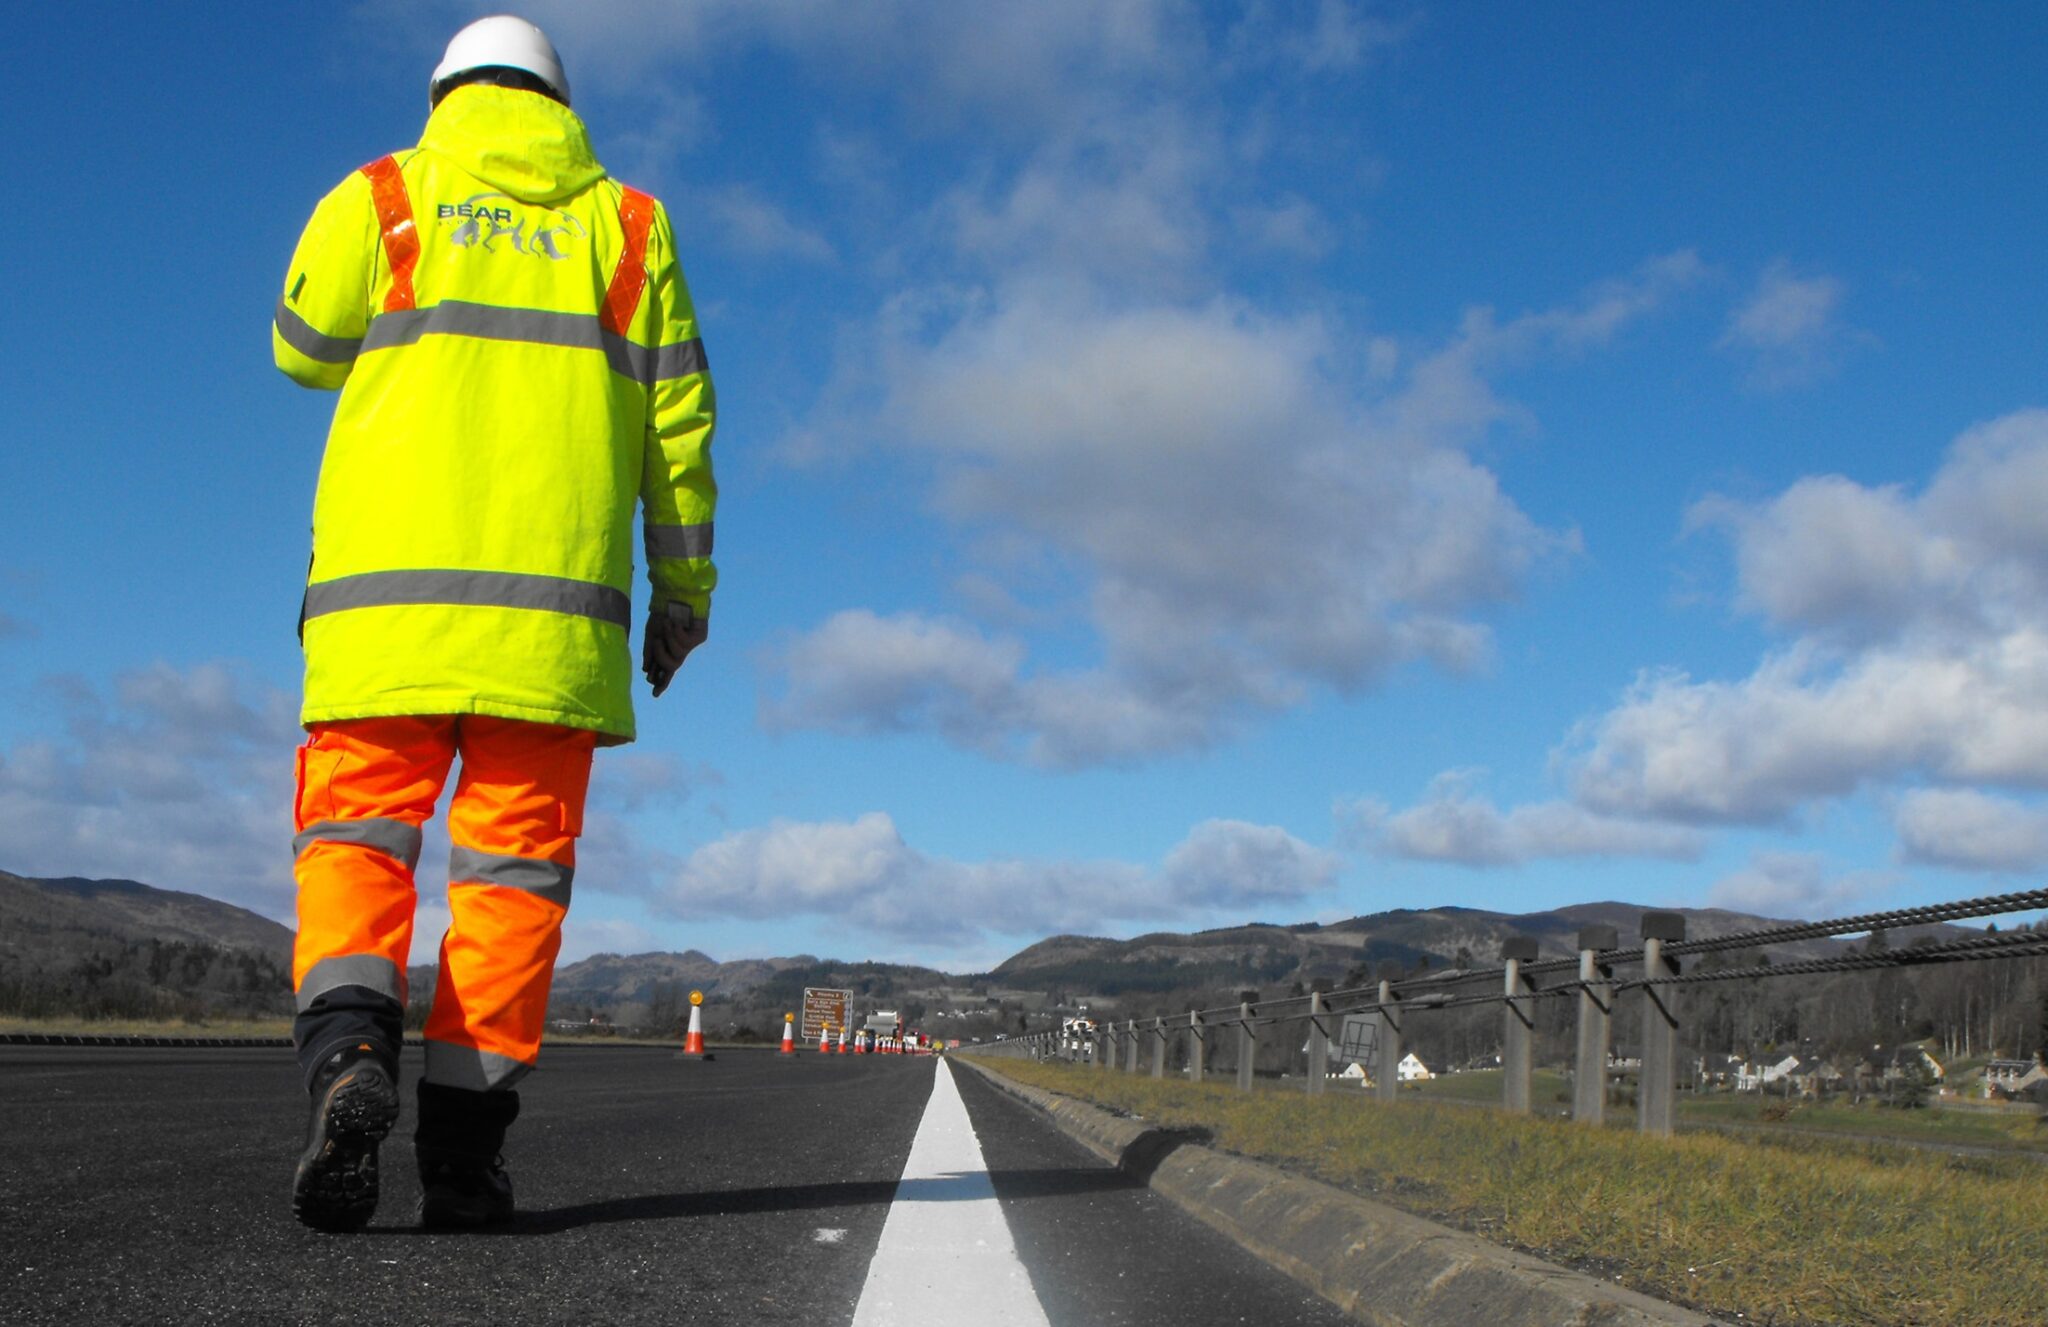 OVERNIGHT SURFACING IMPROVEMENTS PLANNED FOR A82 SOUTH OF KINGSHOUSE